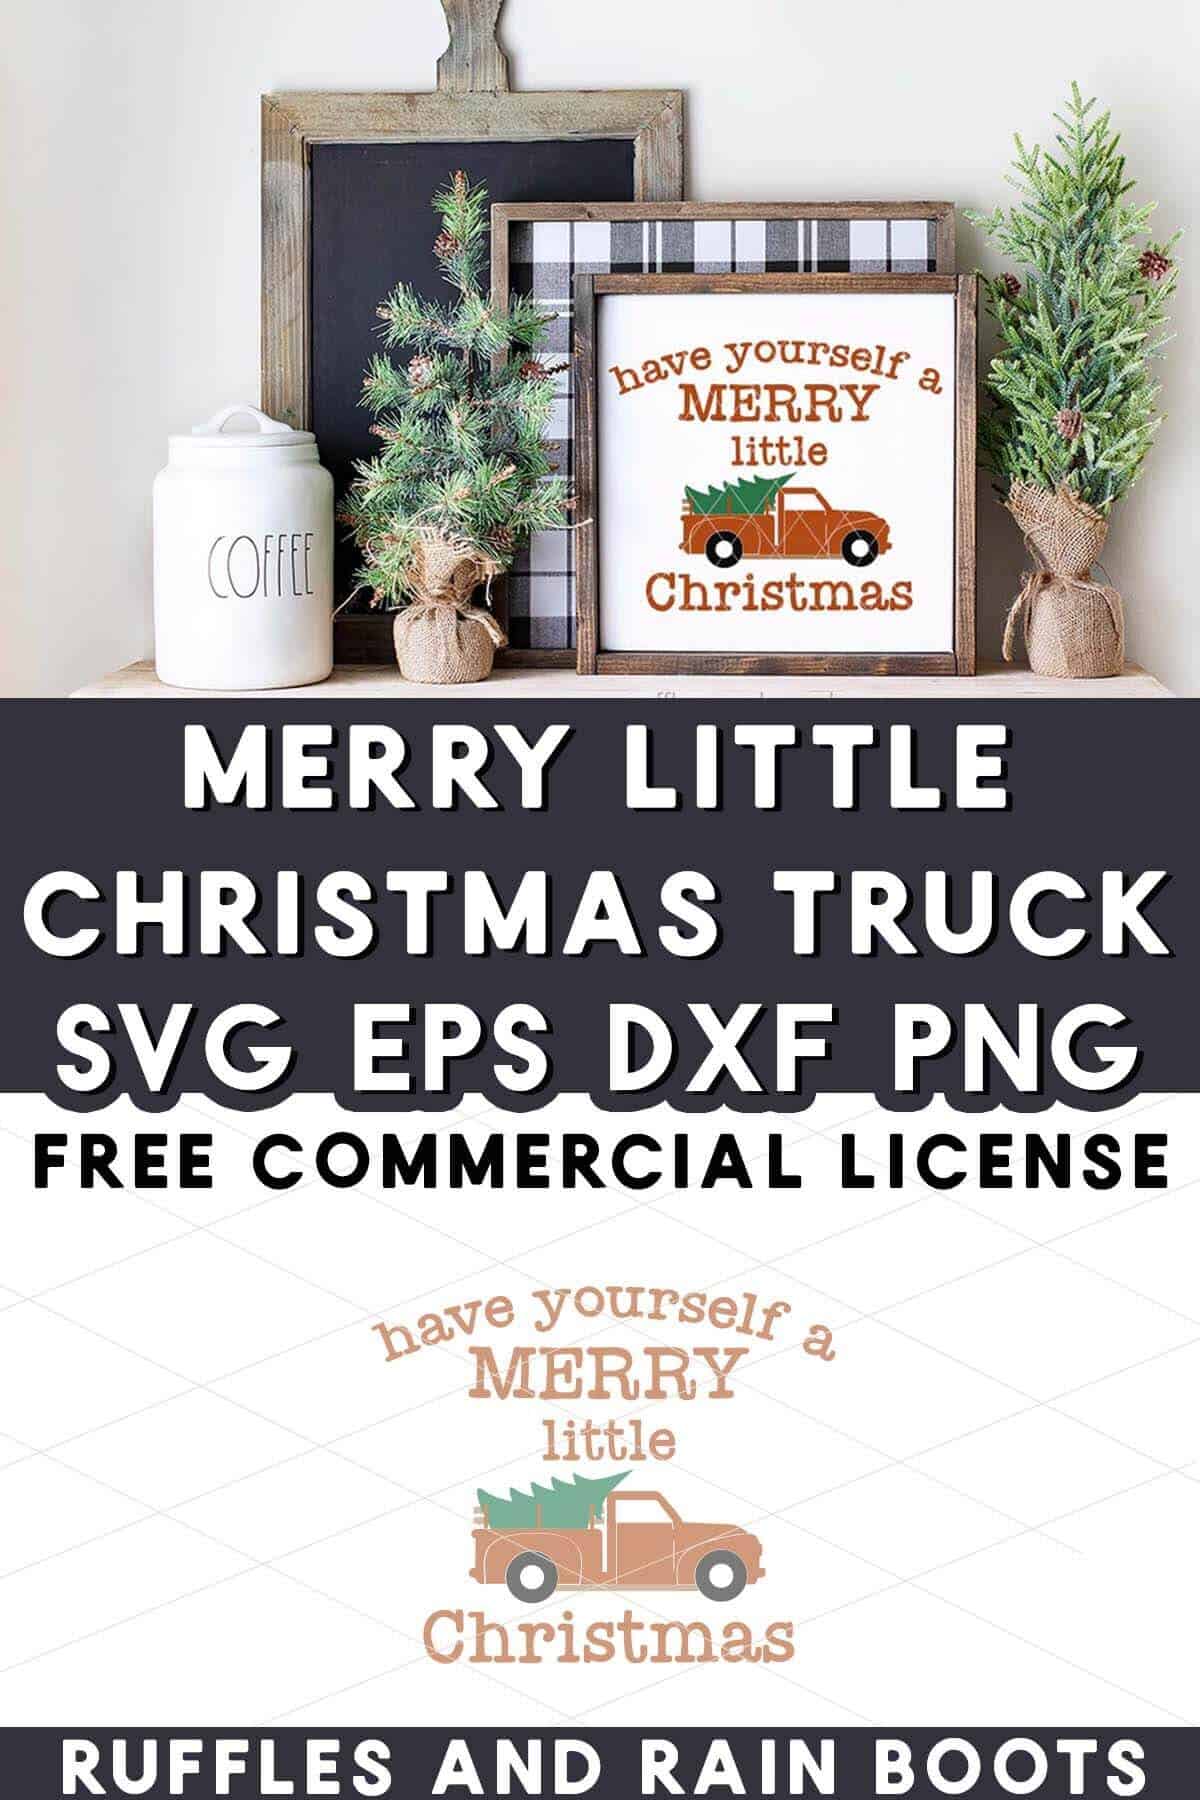 Christmas farmhouse sign with Have Yourself a Merry little Christmas SVG in vinyl with text which reads free commercial license.